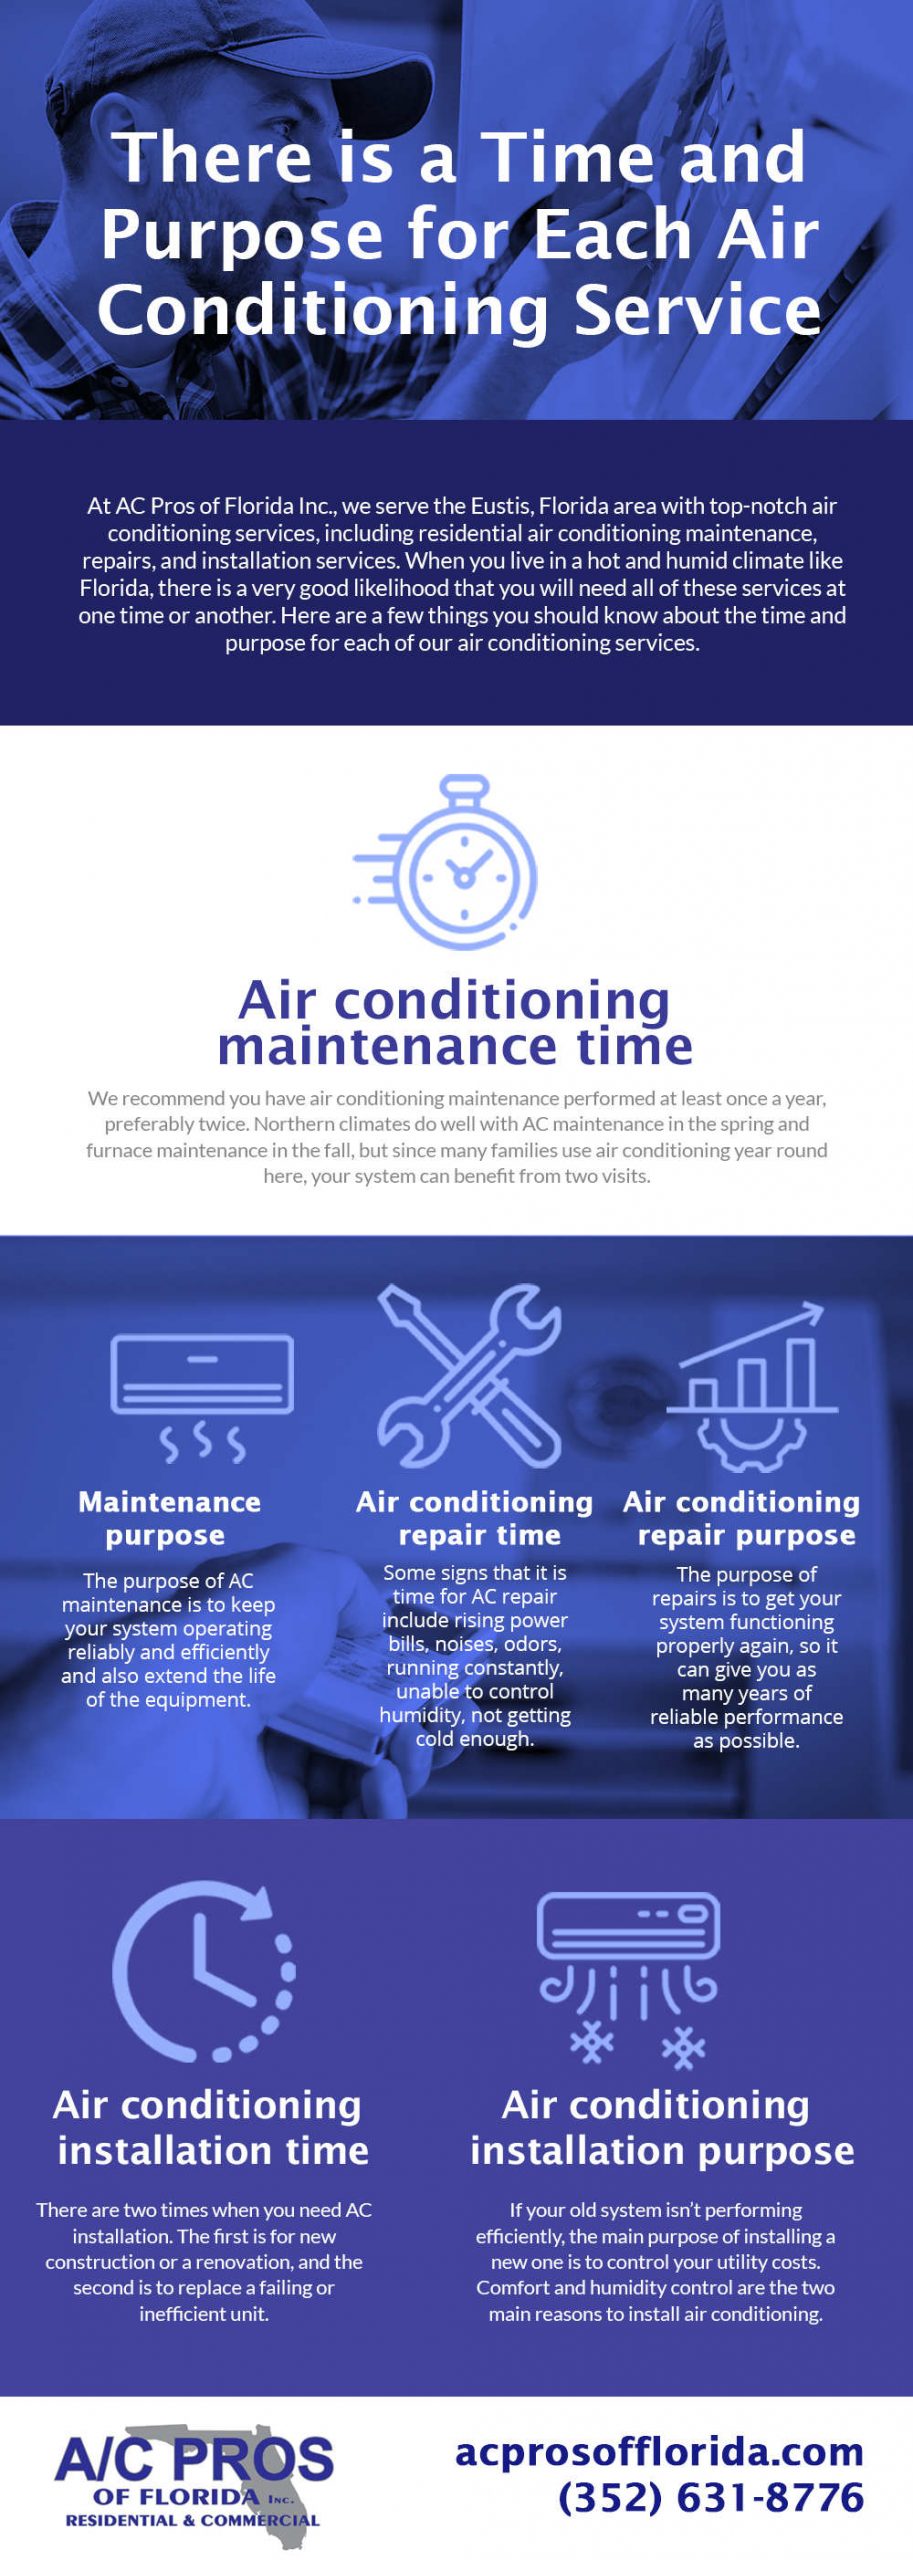 There is a time and purpose for each air conditioning service